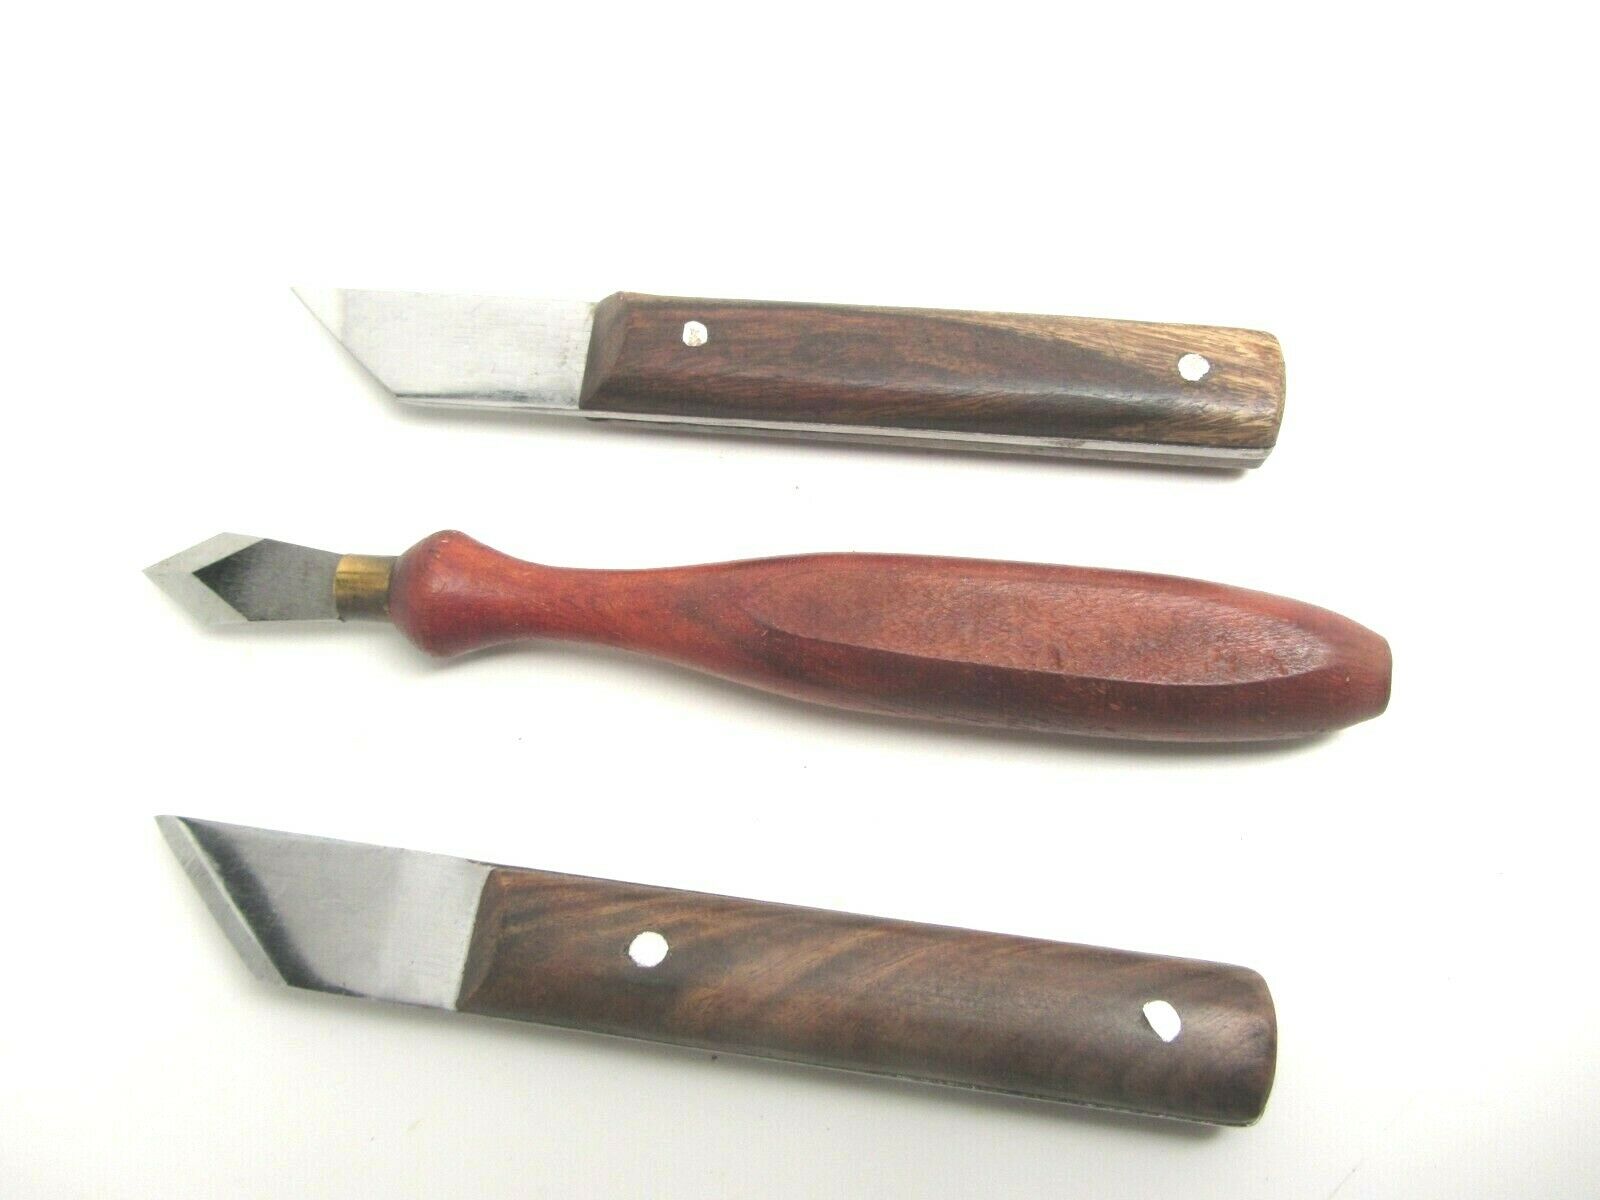 An image of a three-piece set of marking knives from UJ Ramelson.